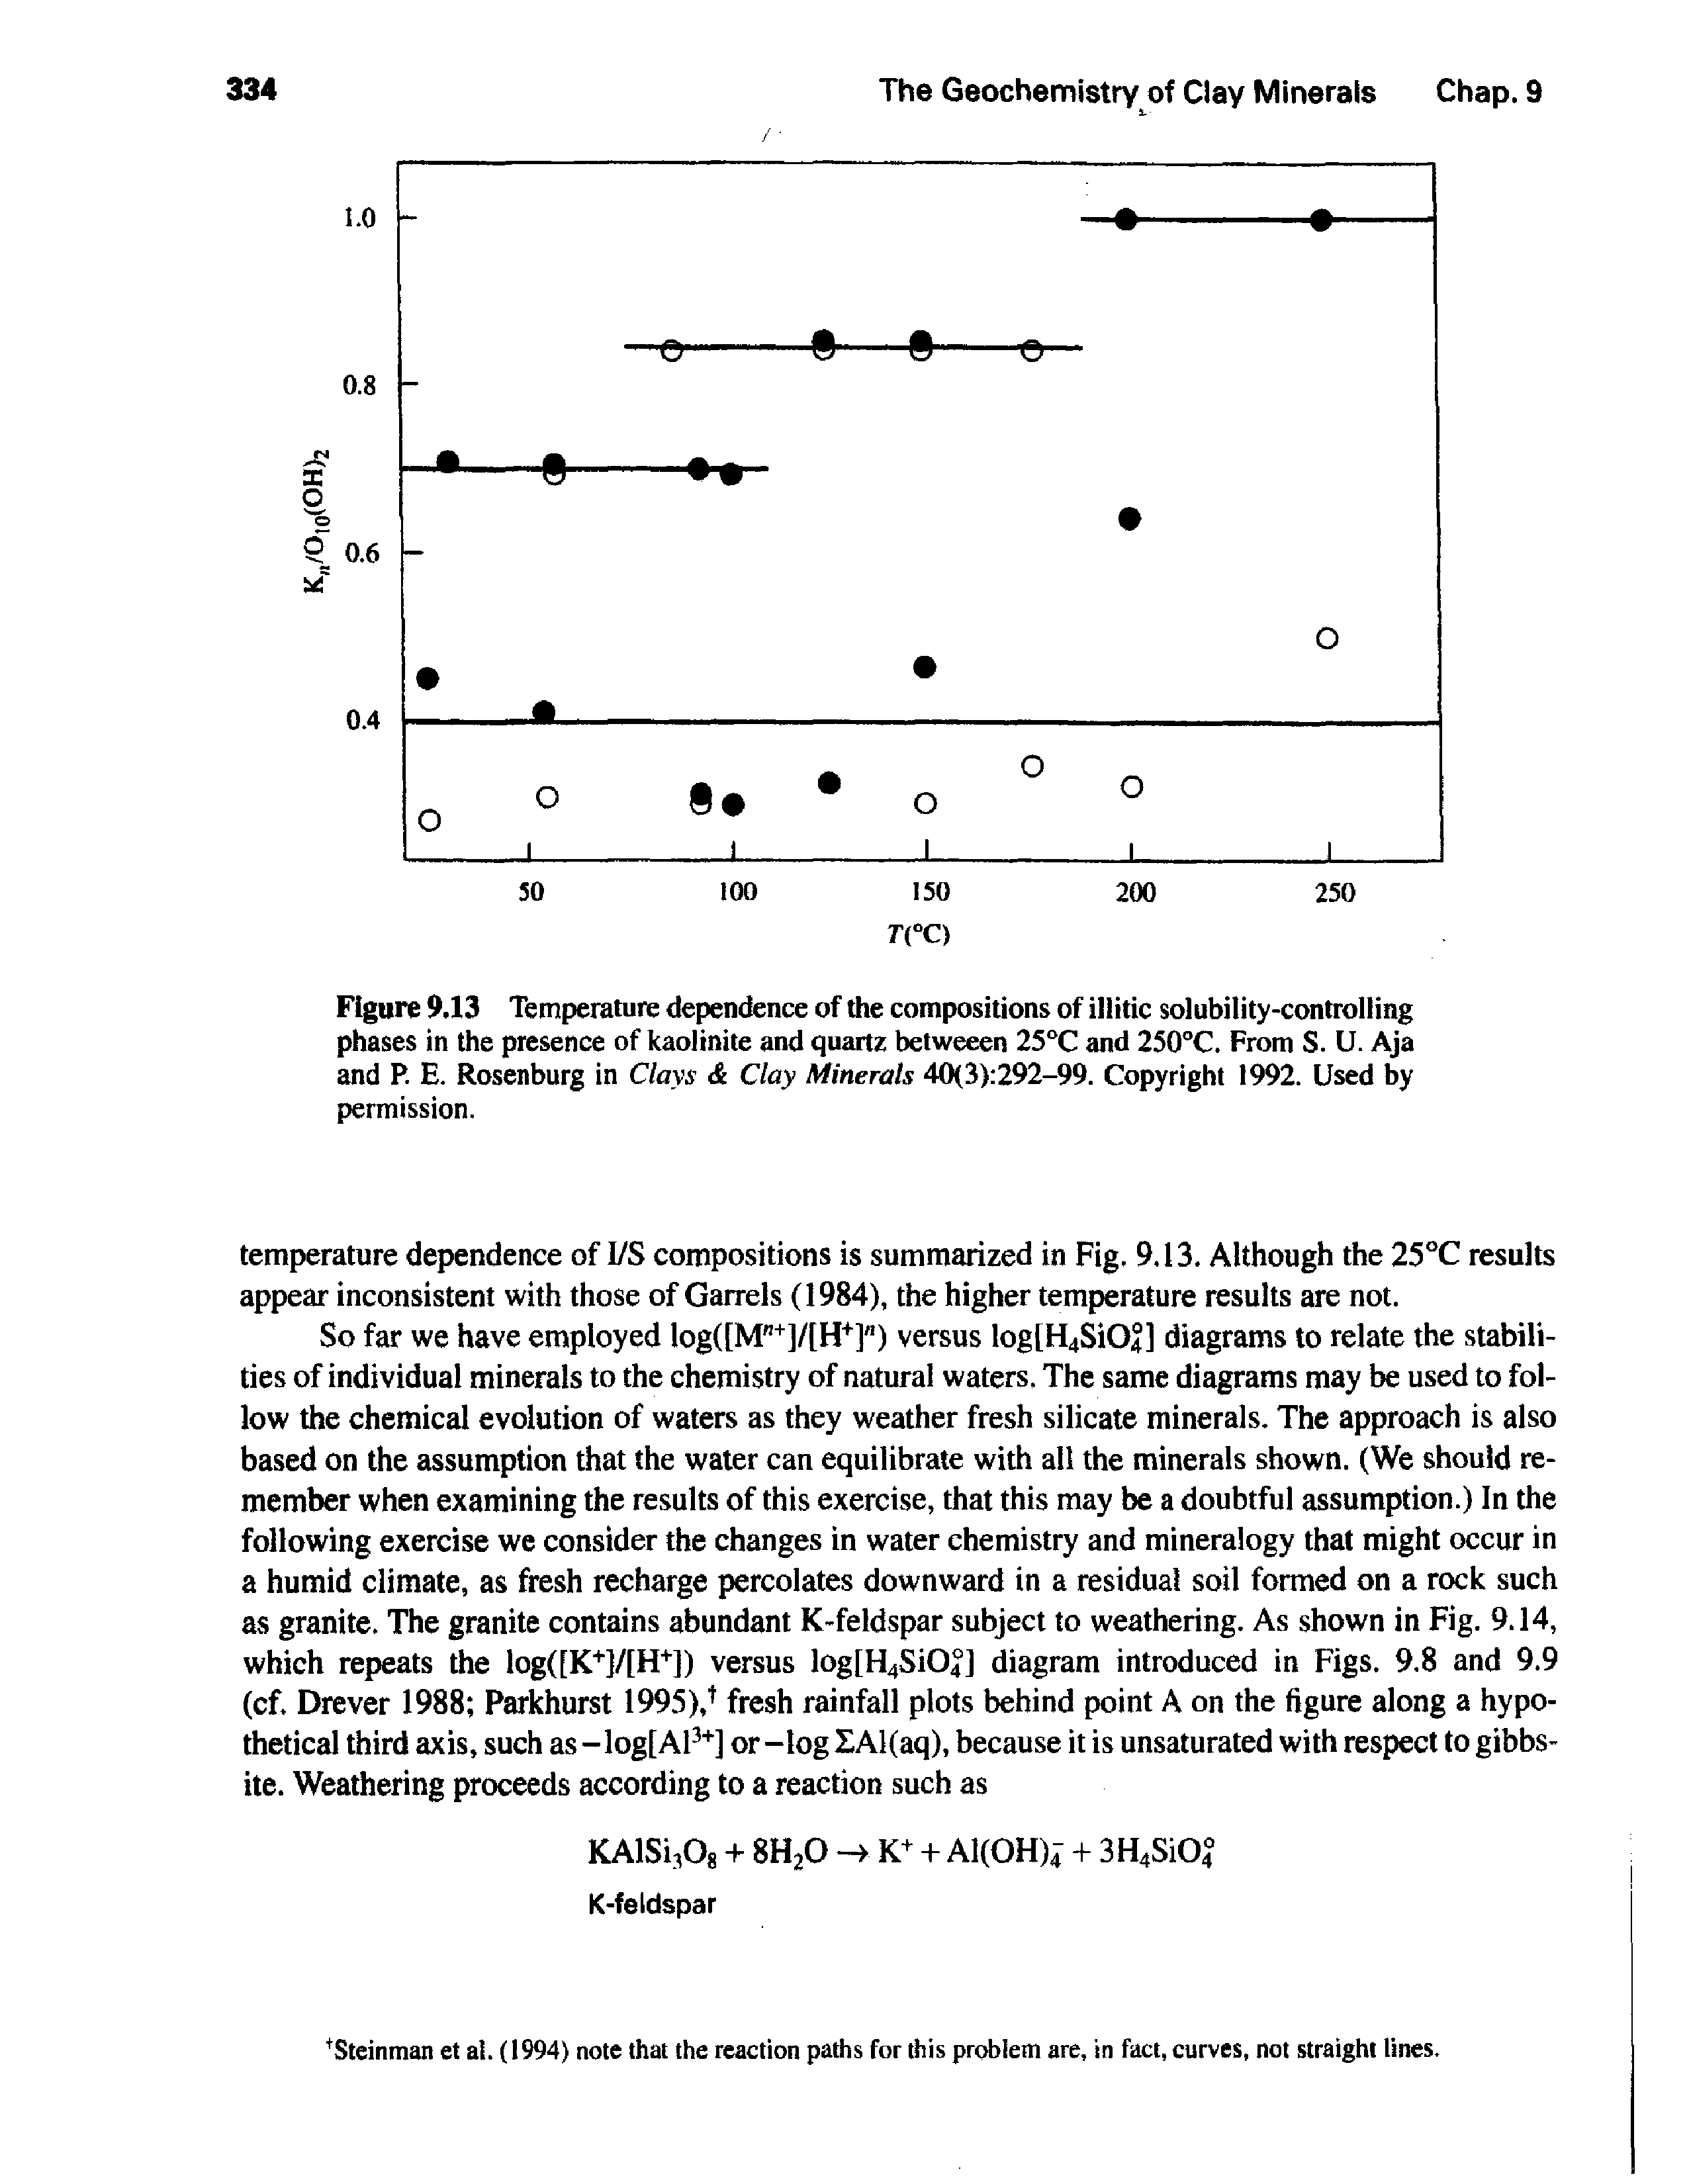 Figure 9.13 Temperature dependence of the compositions of illitic solubility-controlling phases in the presence of kaolinite and quartz betweeen 25°C and 250°C. From S. U. Aja and P. E. Rosenburg in Clays Clay Minerals 40(3) 292-99. Copyright 1992. Used by permission.